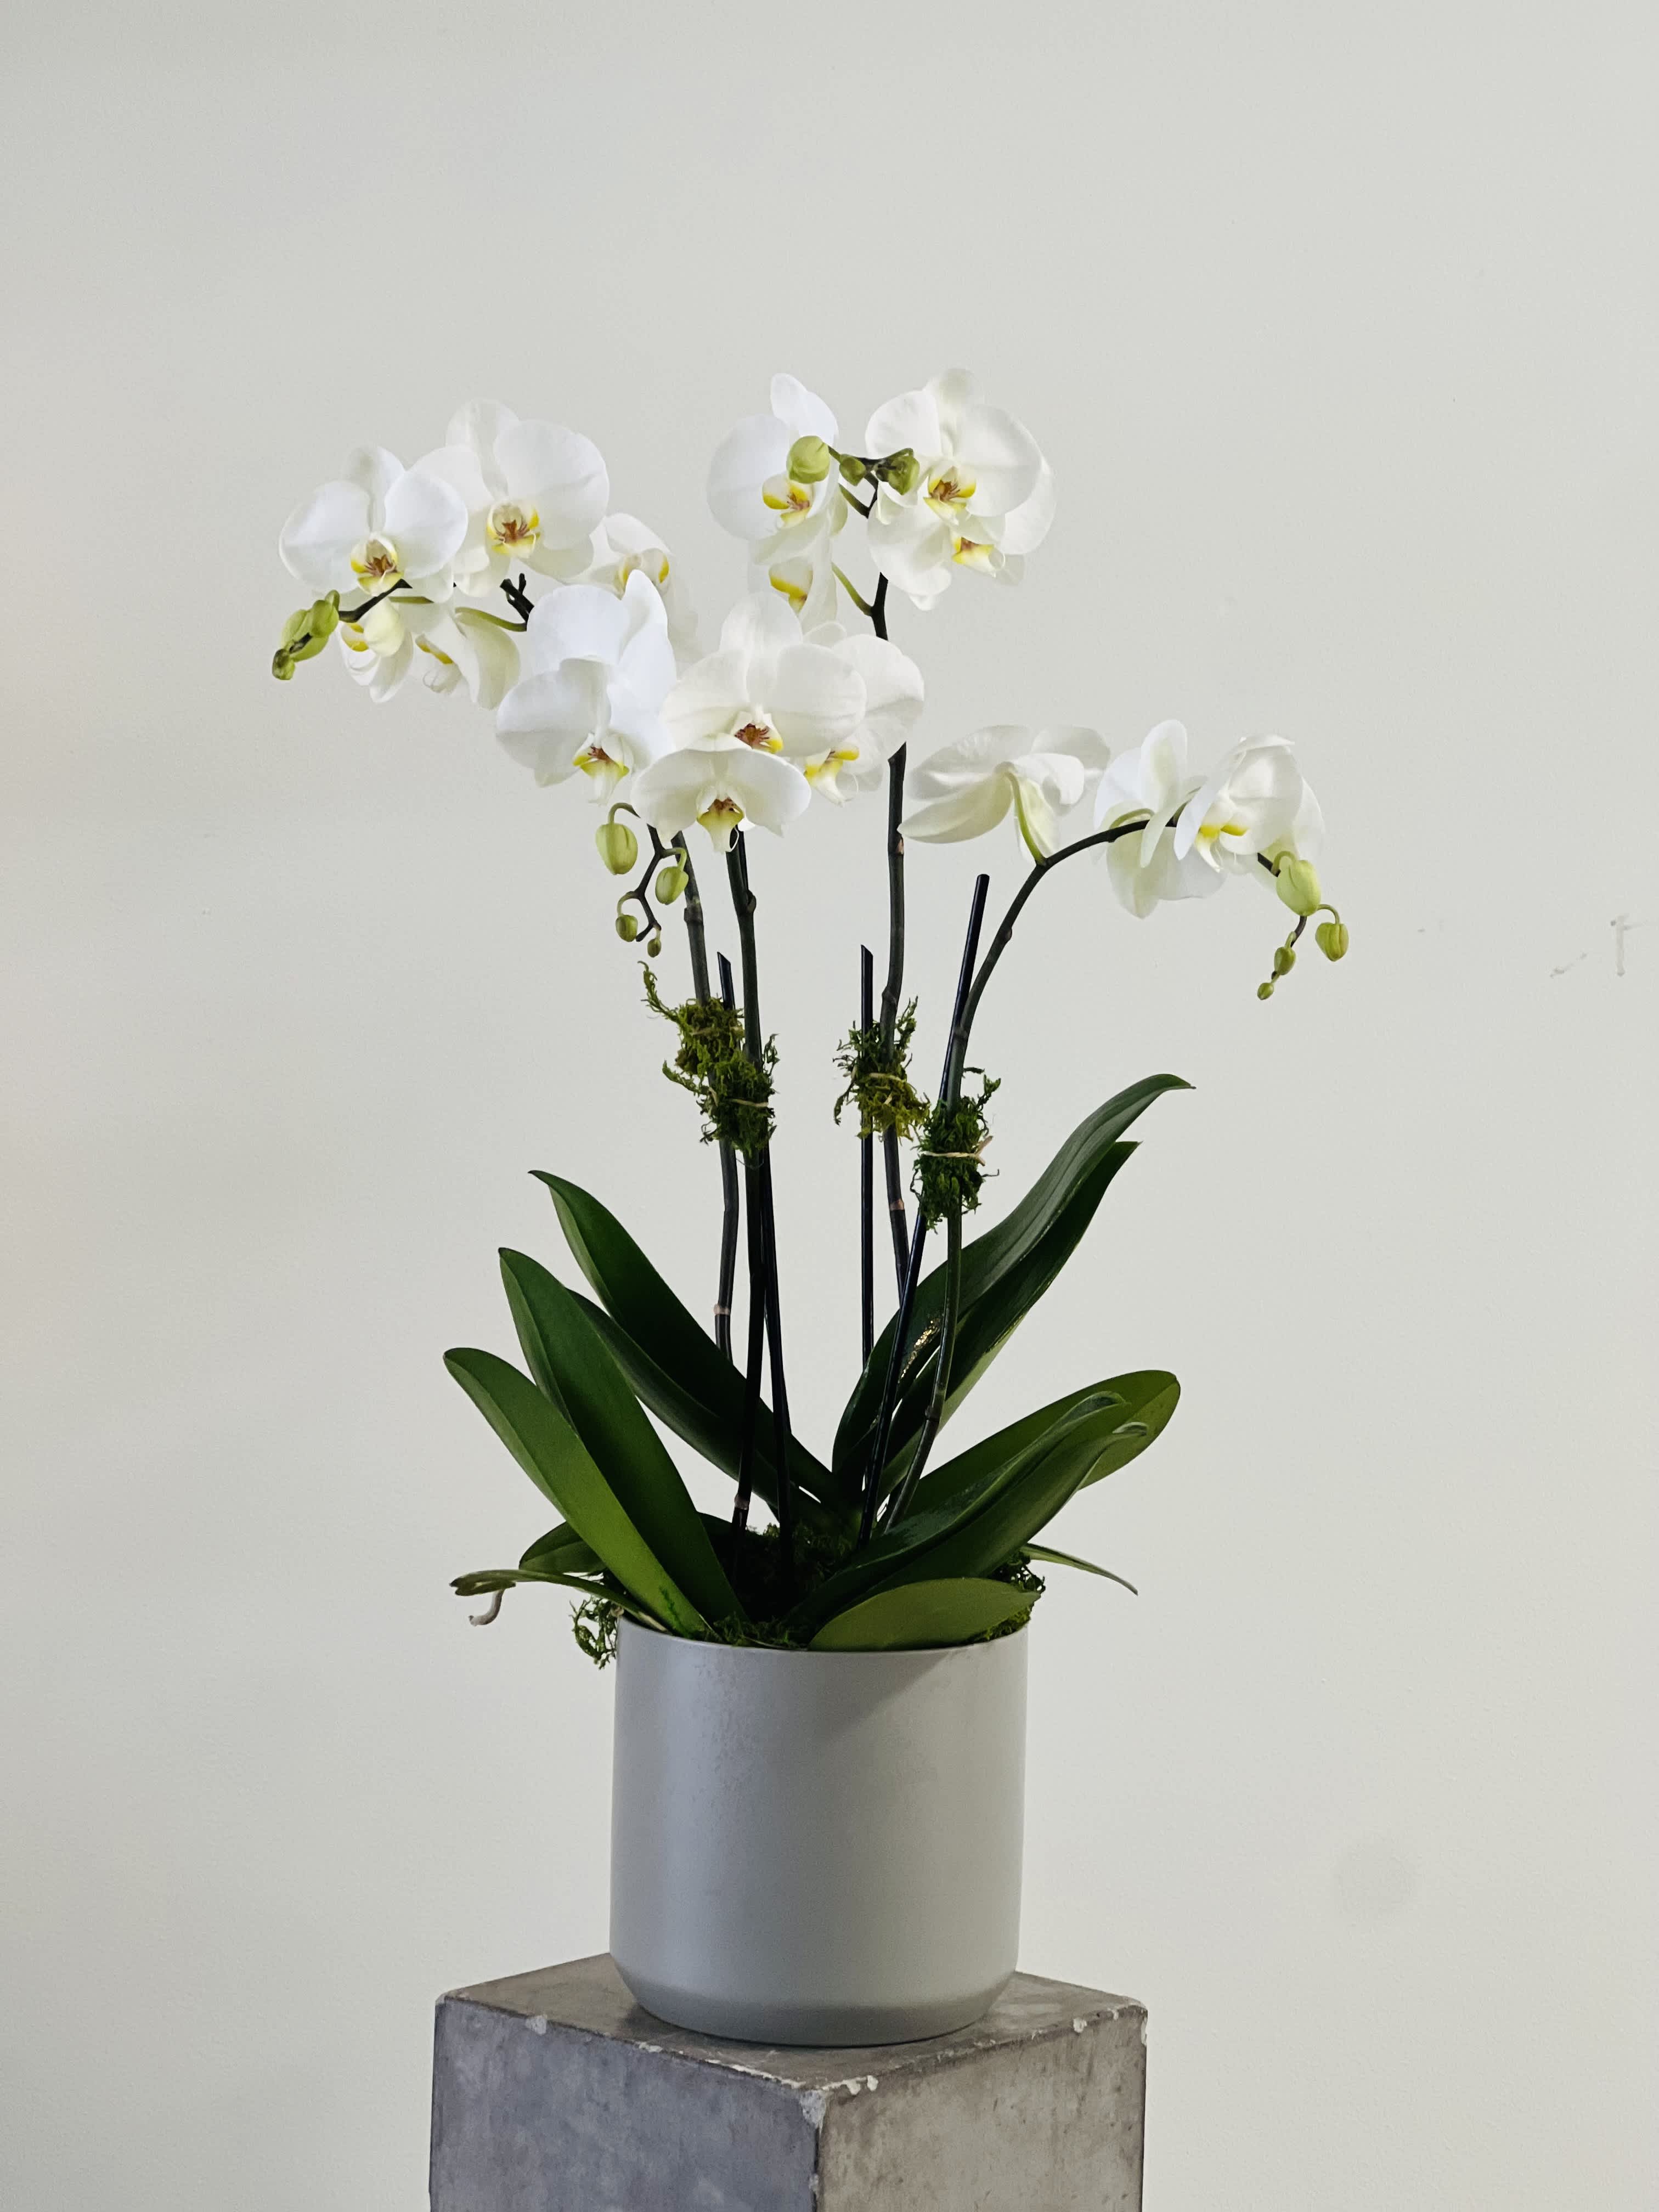 ORCHIDS - LARGE - We love orchids. Reigning Empress of the of the blooming plants; ticking so many boxes that our customers crave.   There is a touch of moss that acts like icing on a cake and makes the gift look polished and complete.